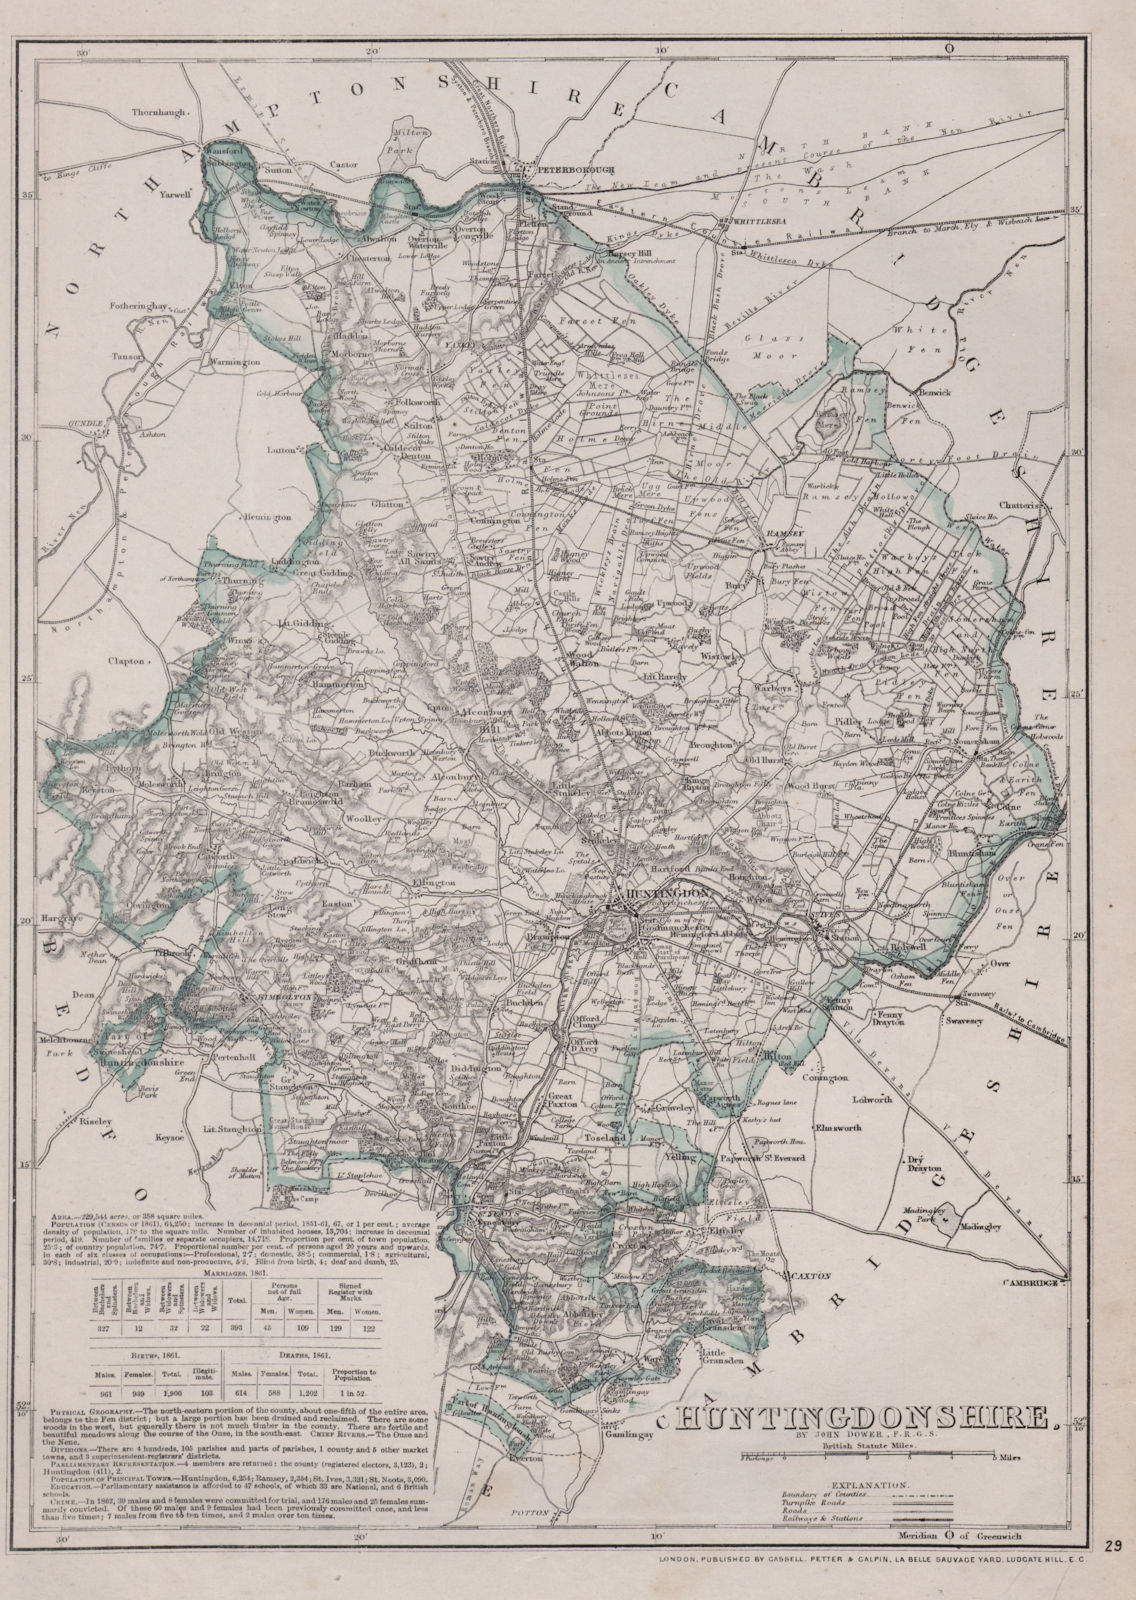 Associate Product HUNTINGDONSHIRE county map. Shows 2 exclaves. Railways.DOWER/BR DAVIES 1868